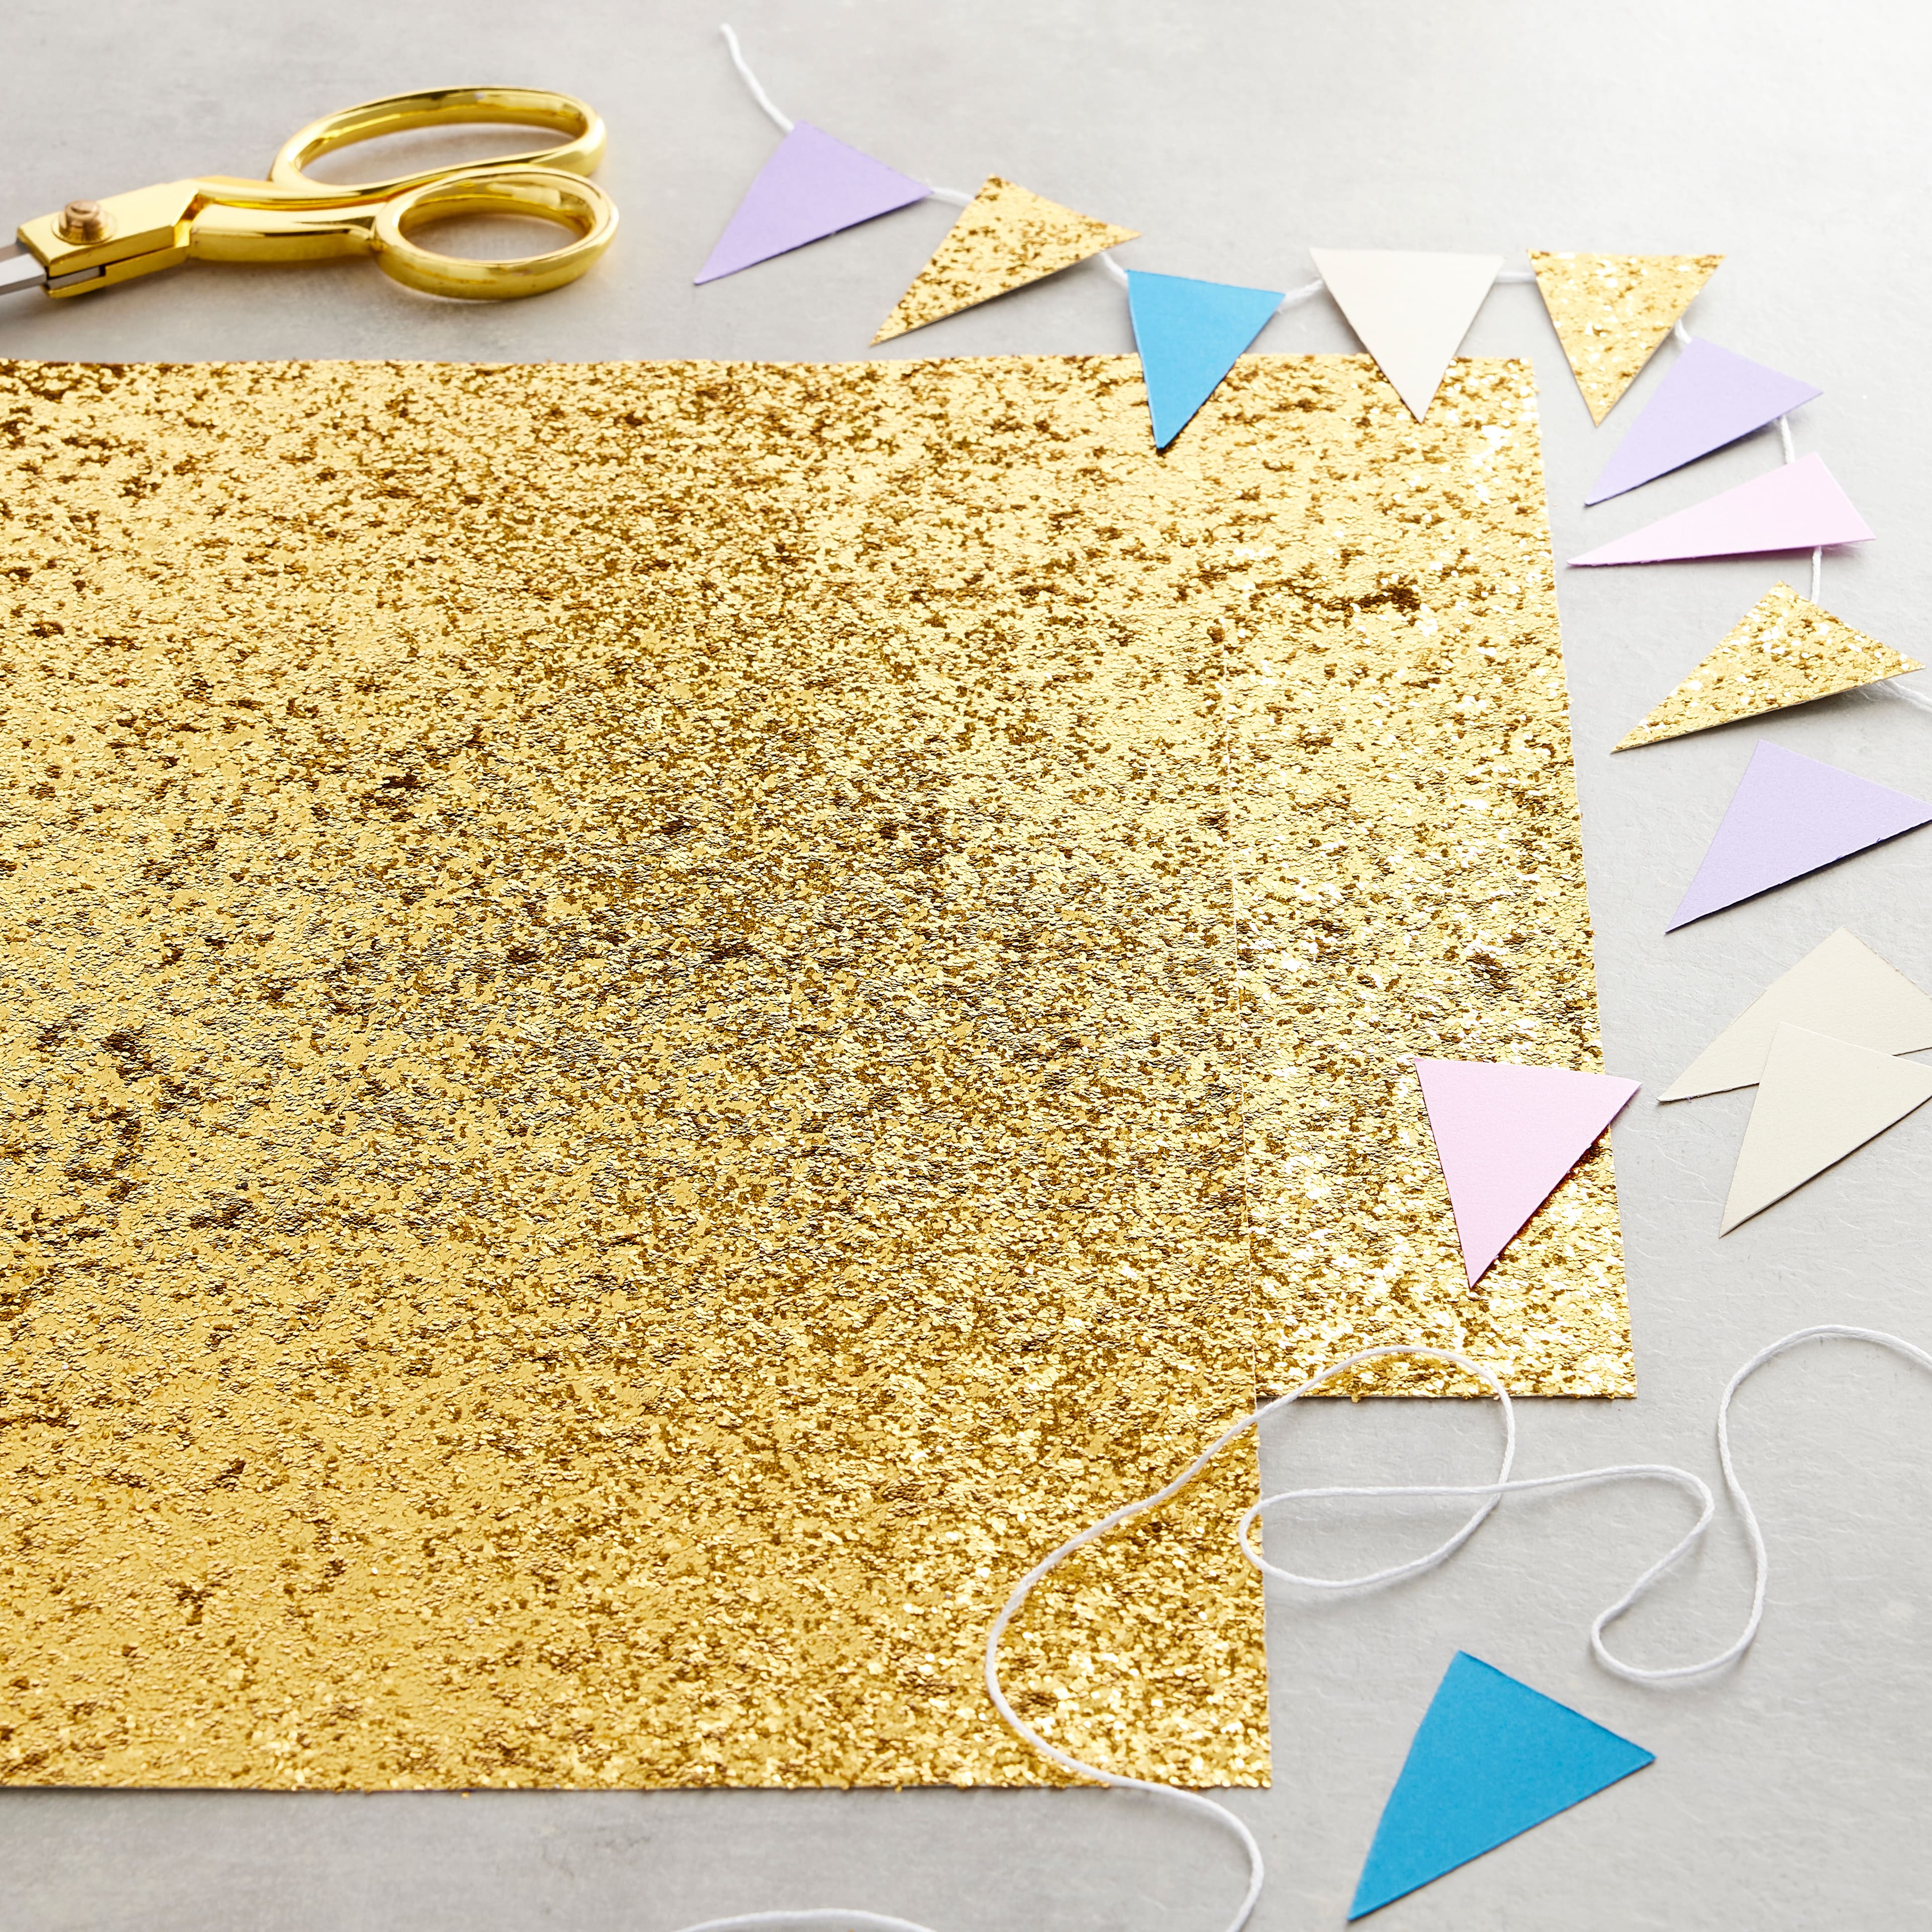 Large Glitter Paper by Recollections™, 12 x 12, Michaels